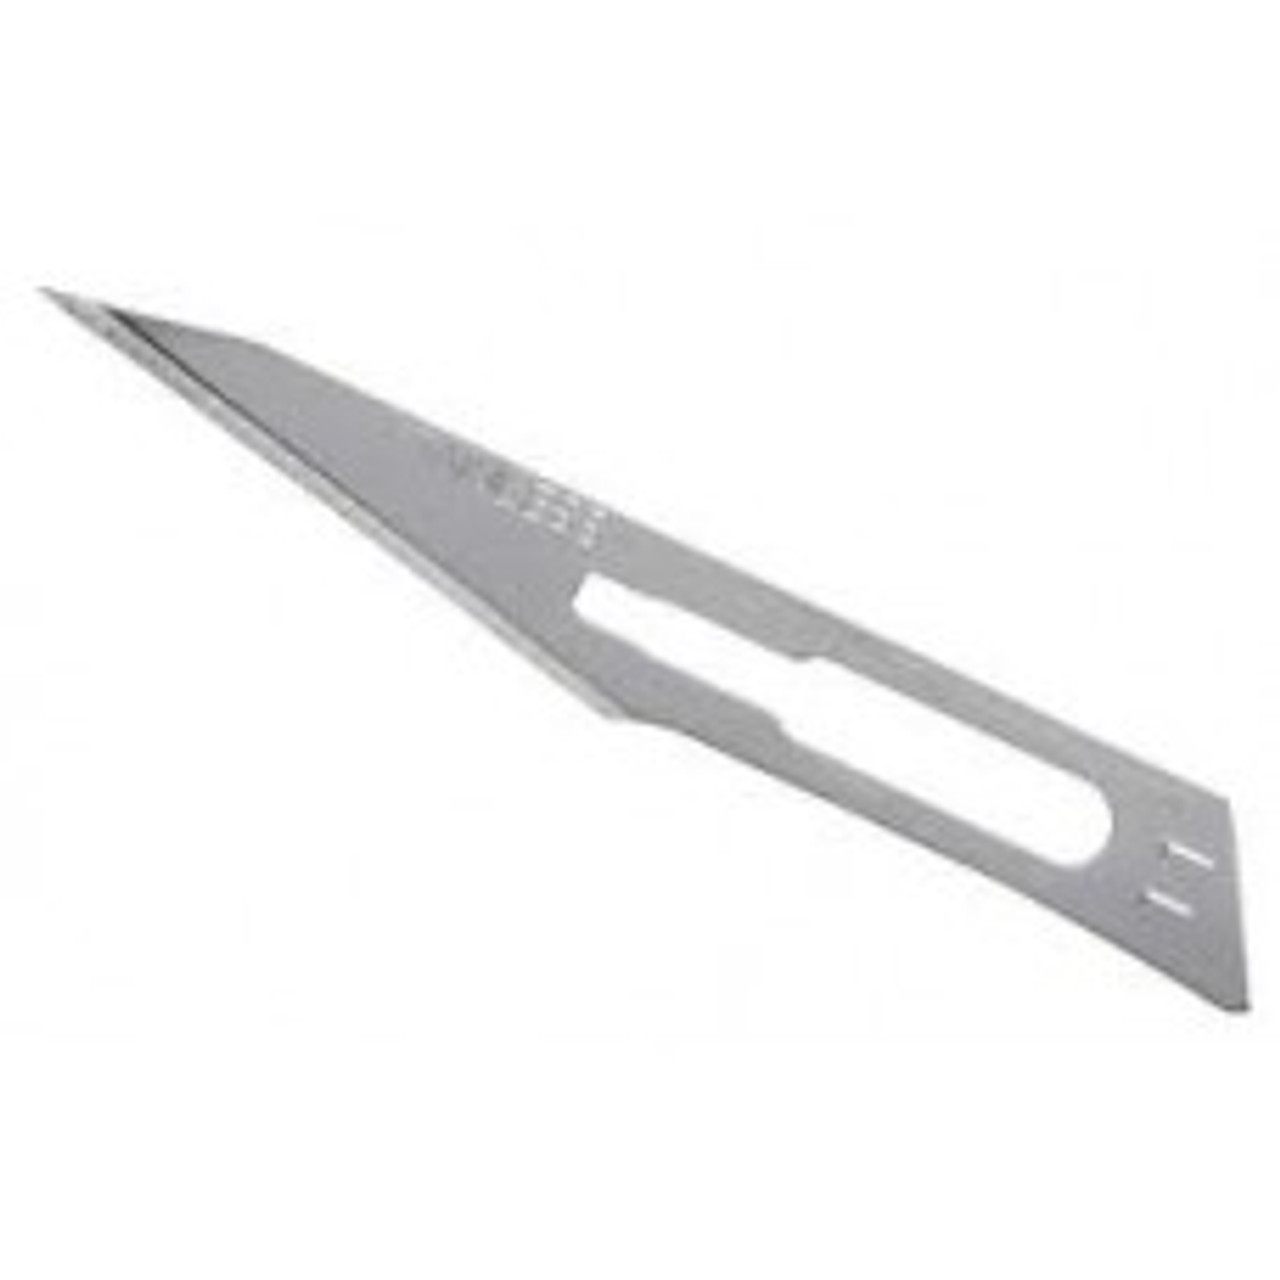 Surgical Blades - Carbon Steel